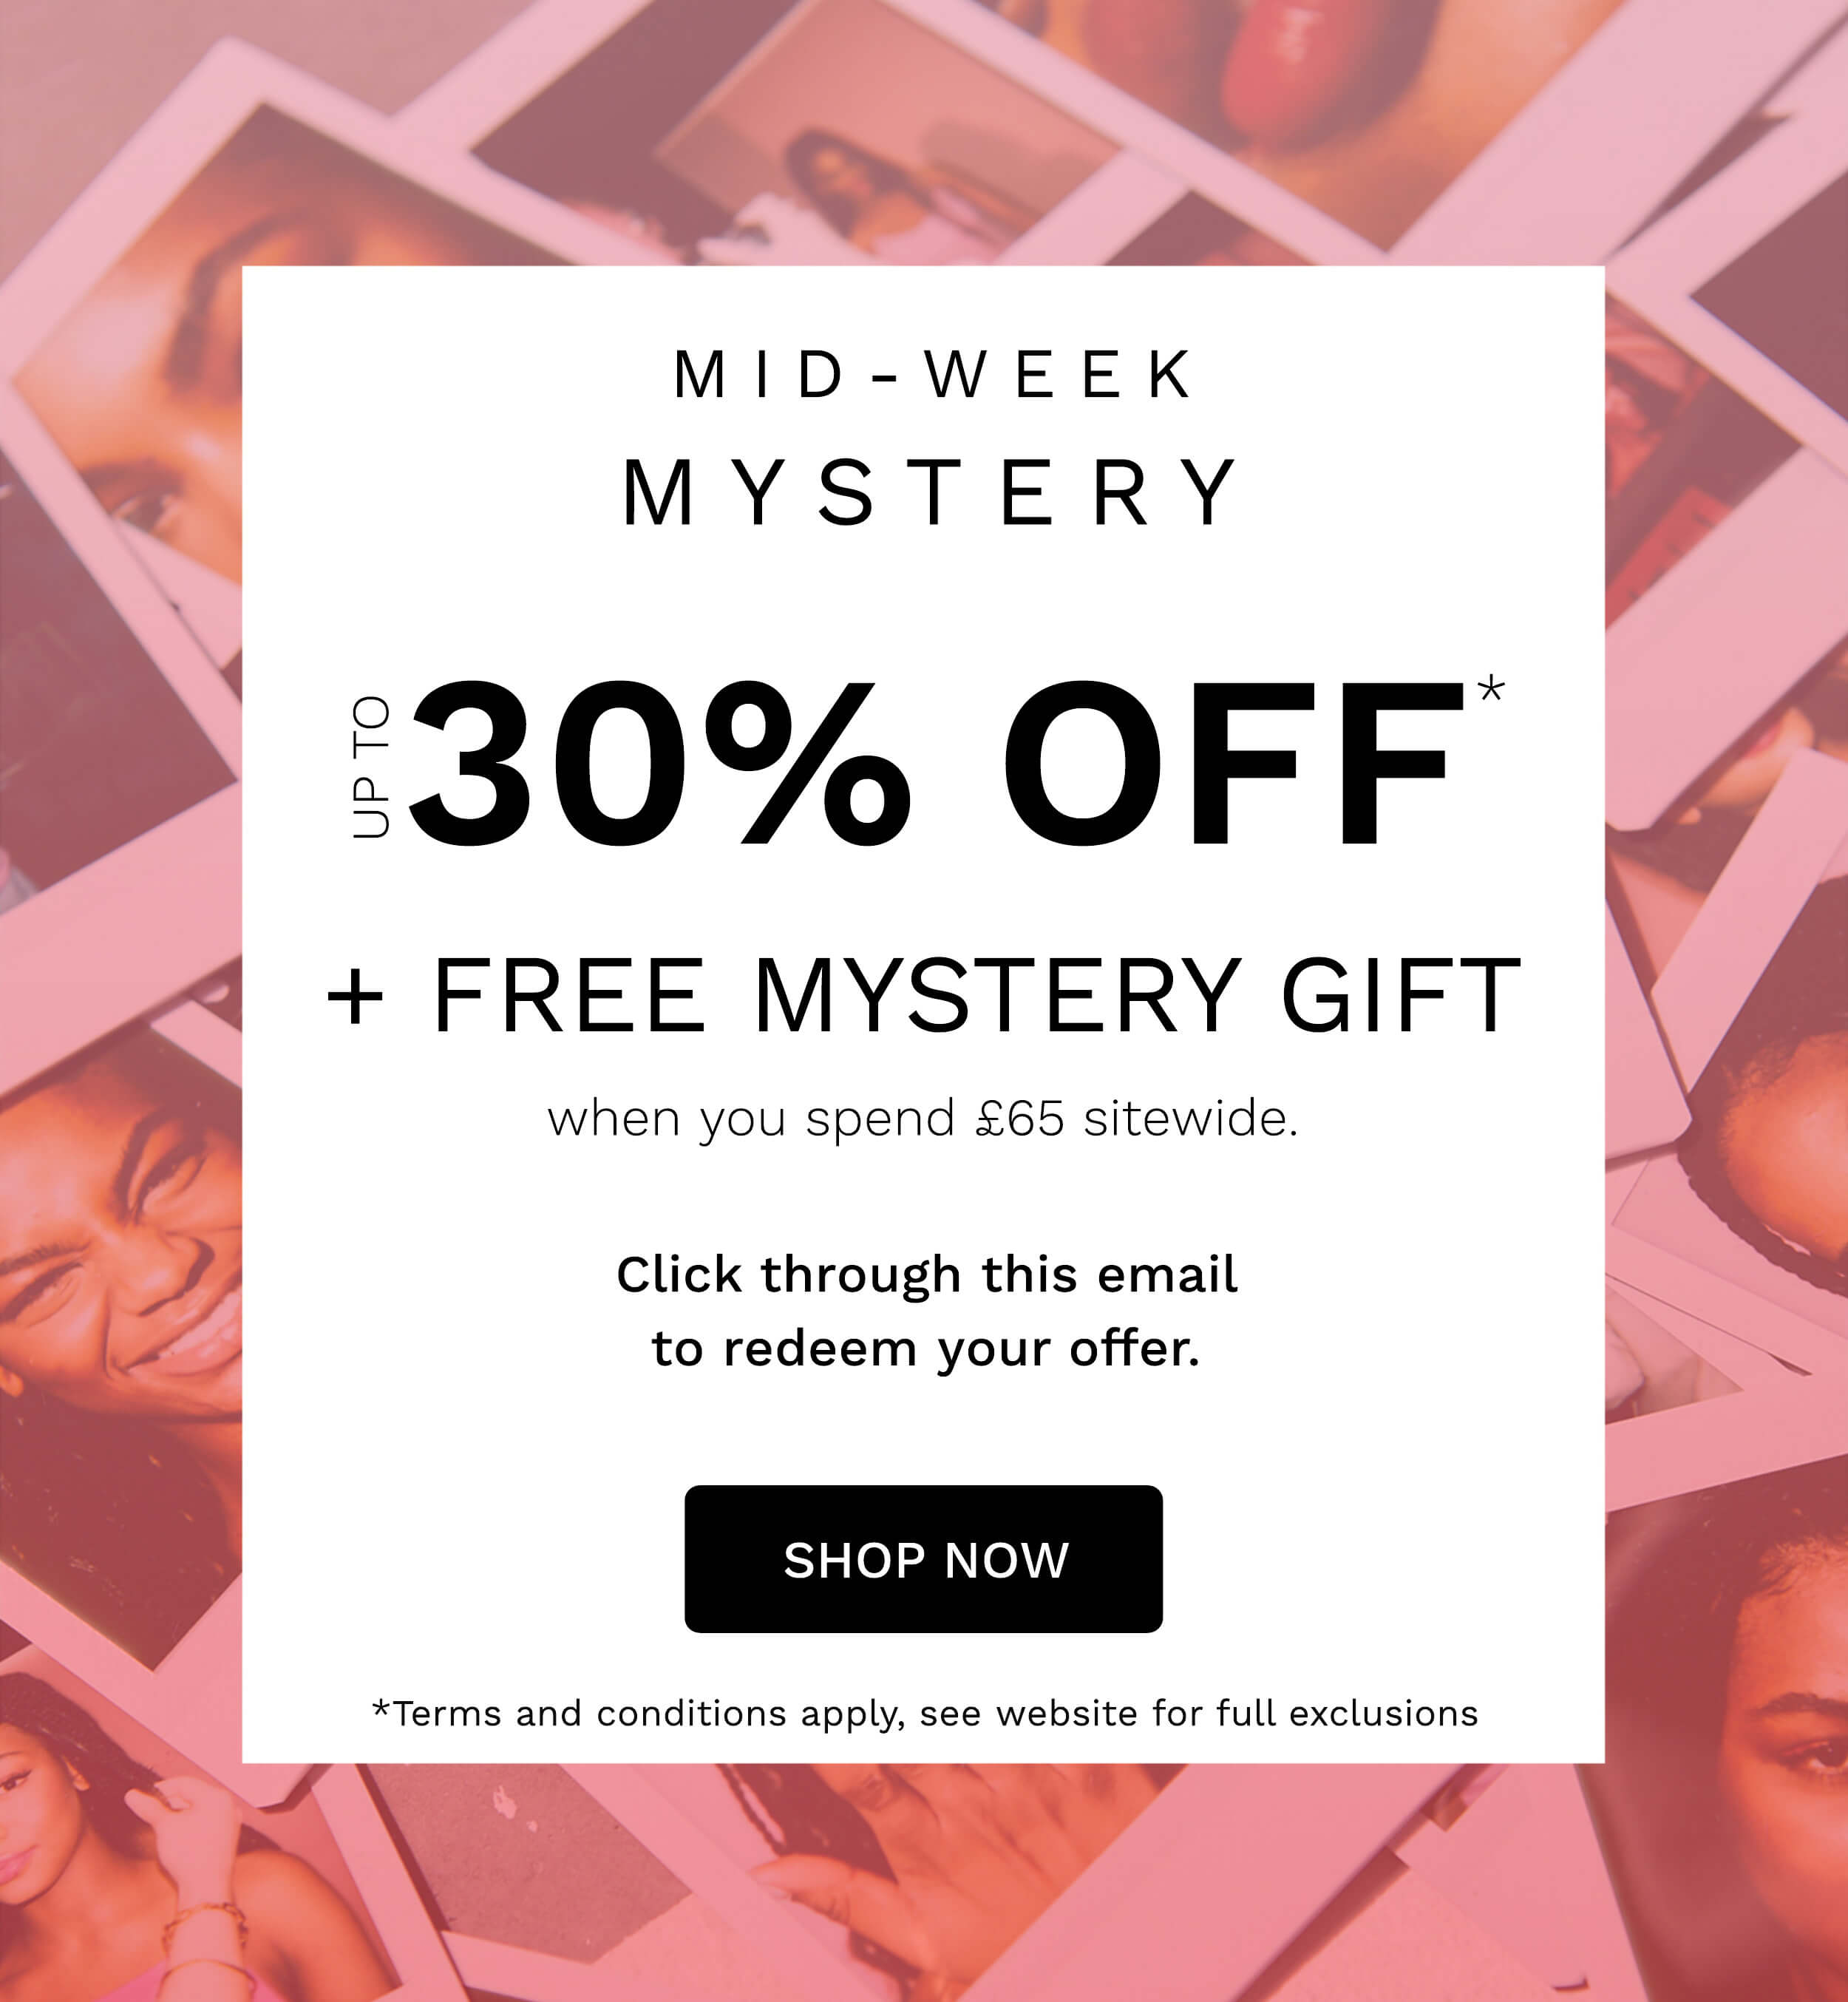 UP TO 30 PERCENT OFF PLUS MYSTERY GIFT